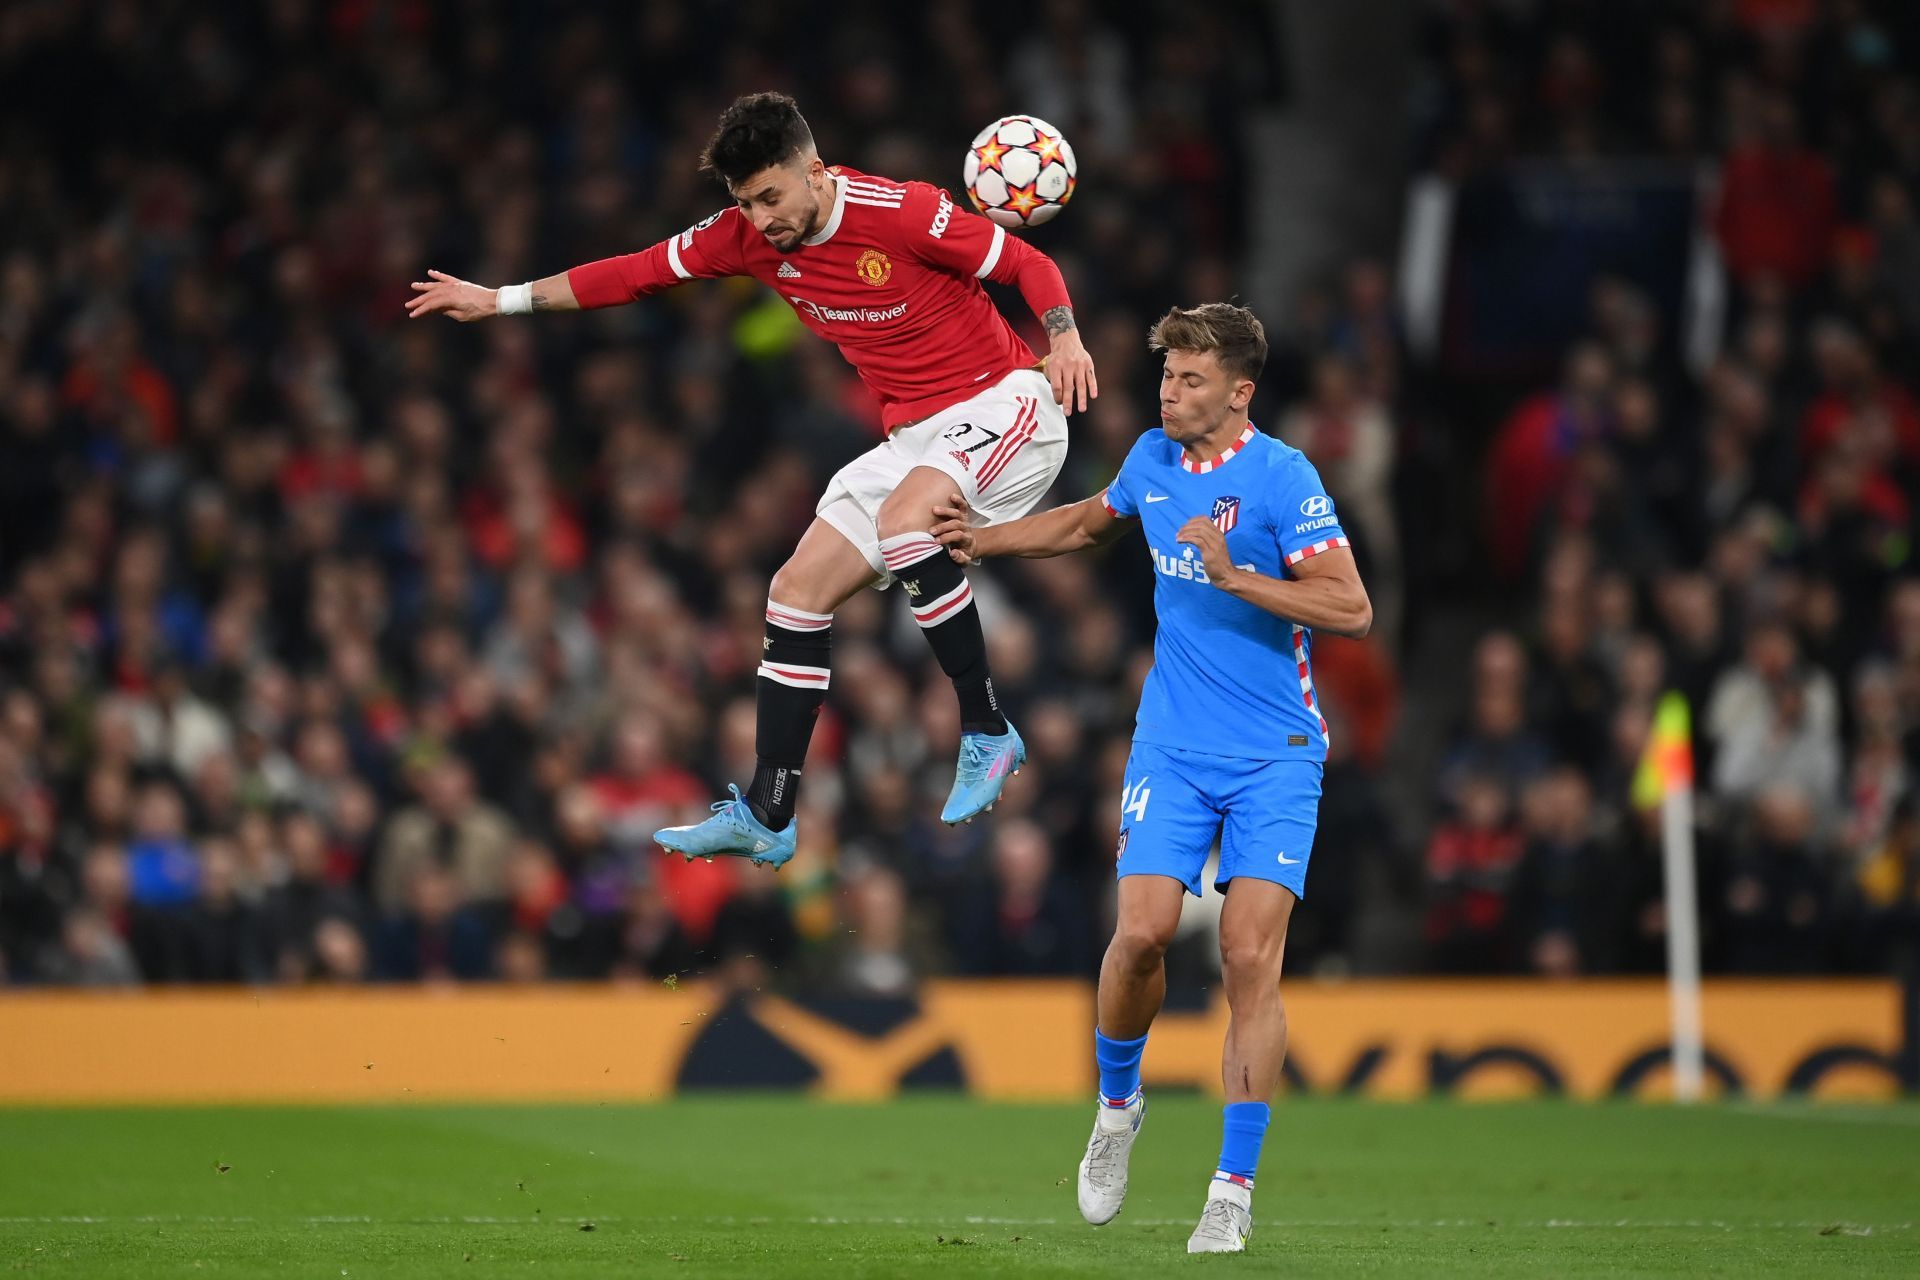 Marcus Llorente performed his duty admirably against Manchester United